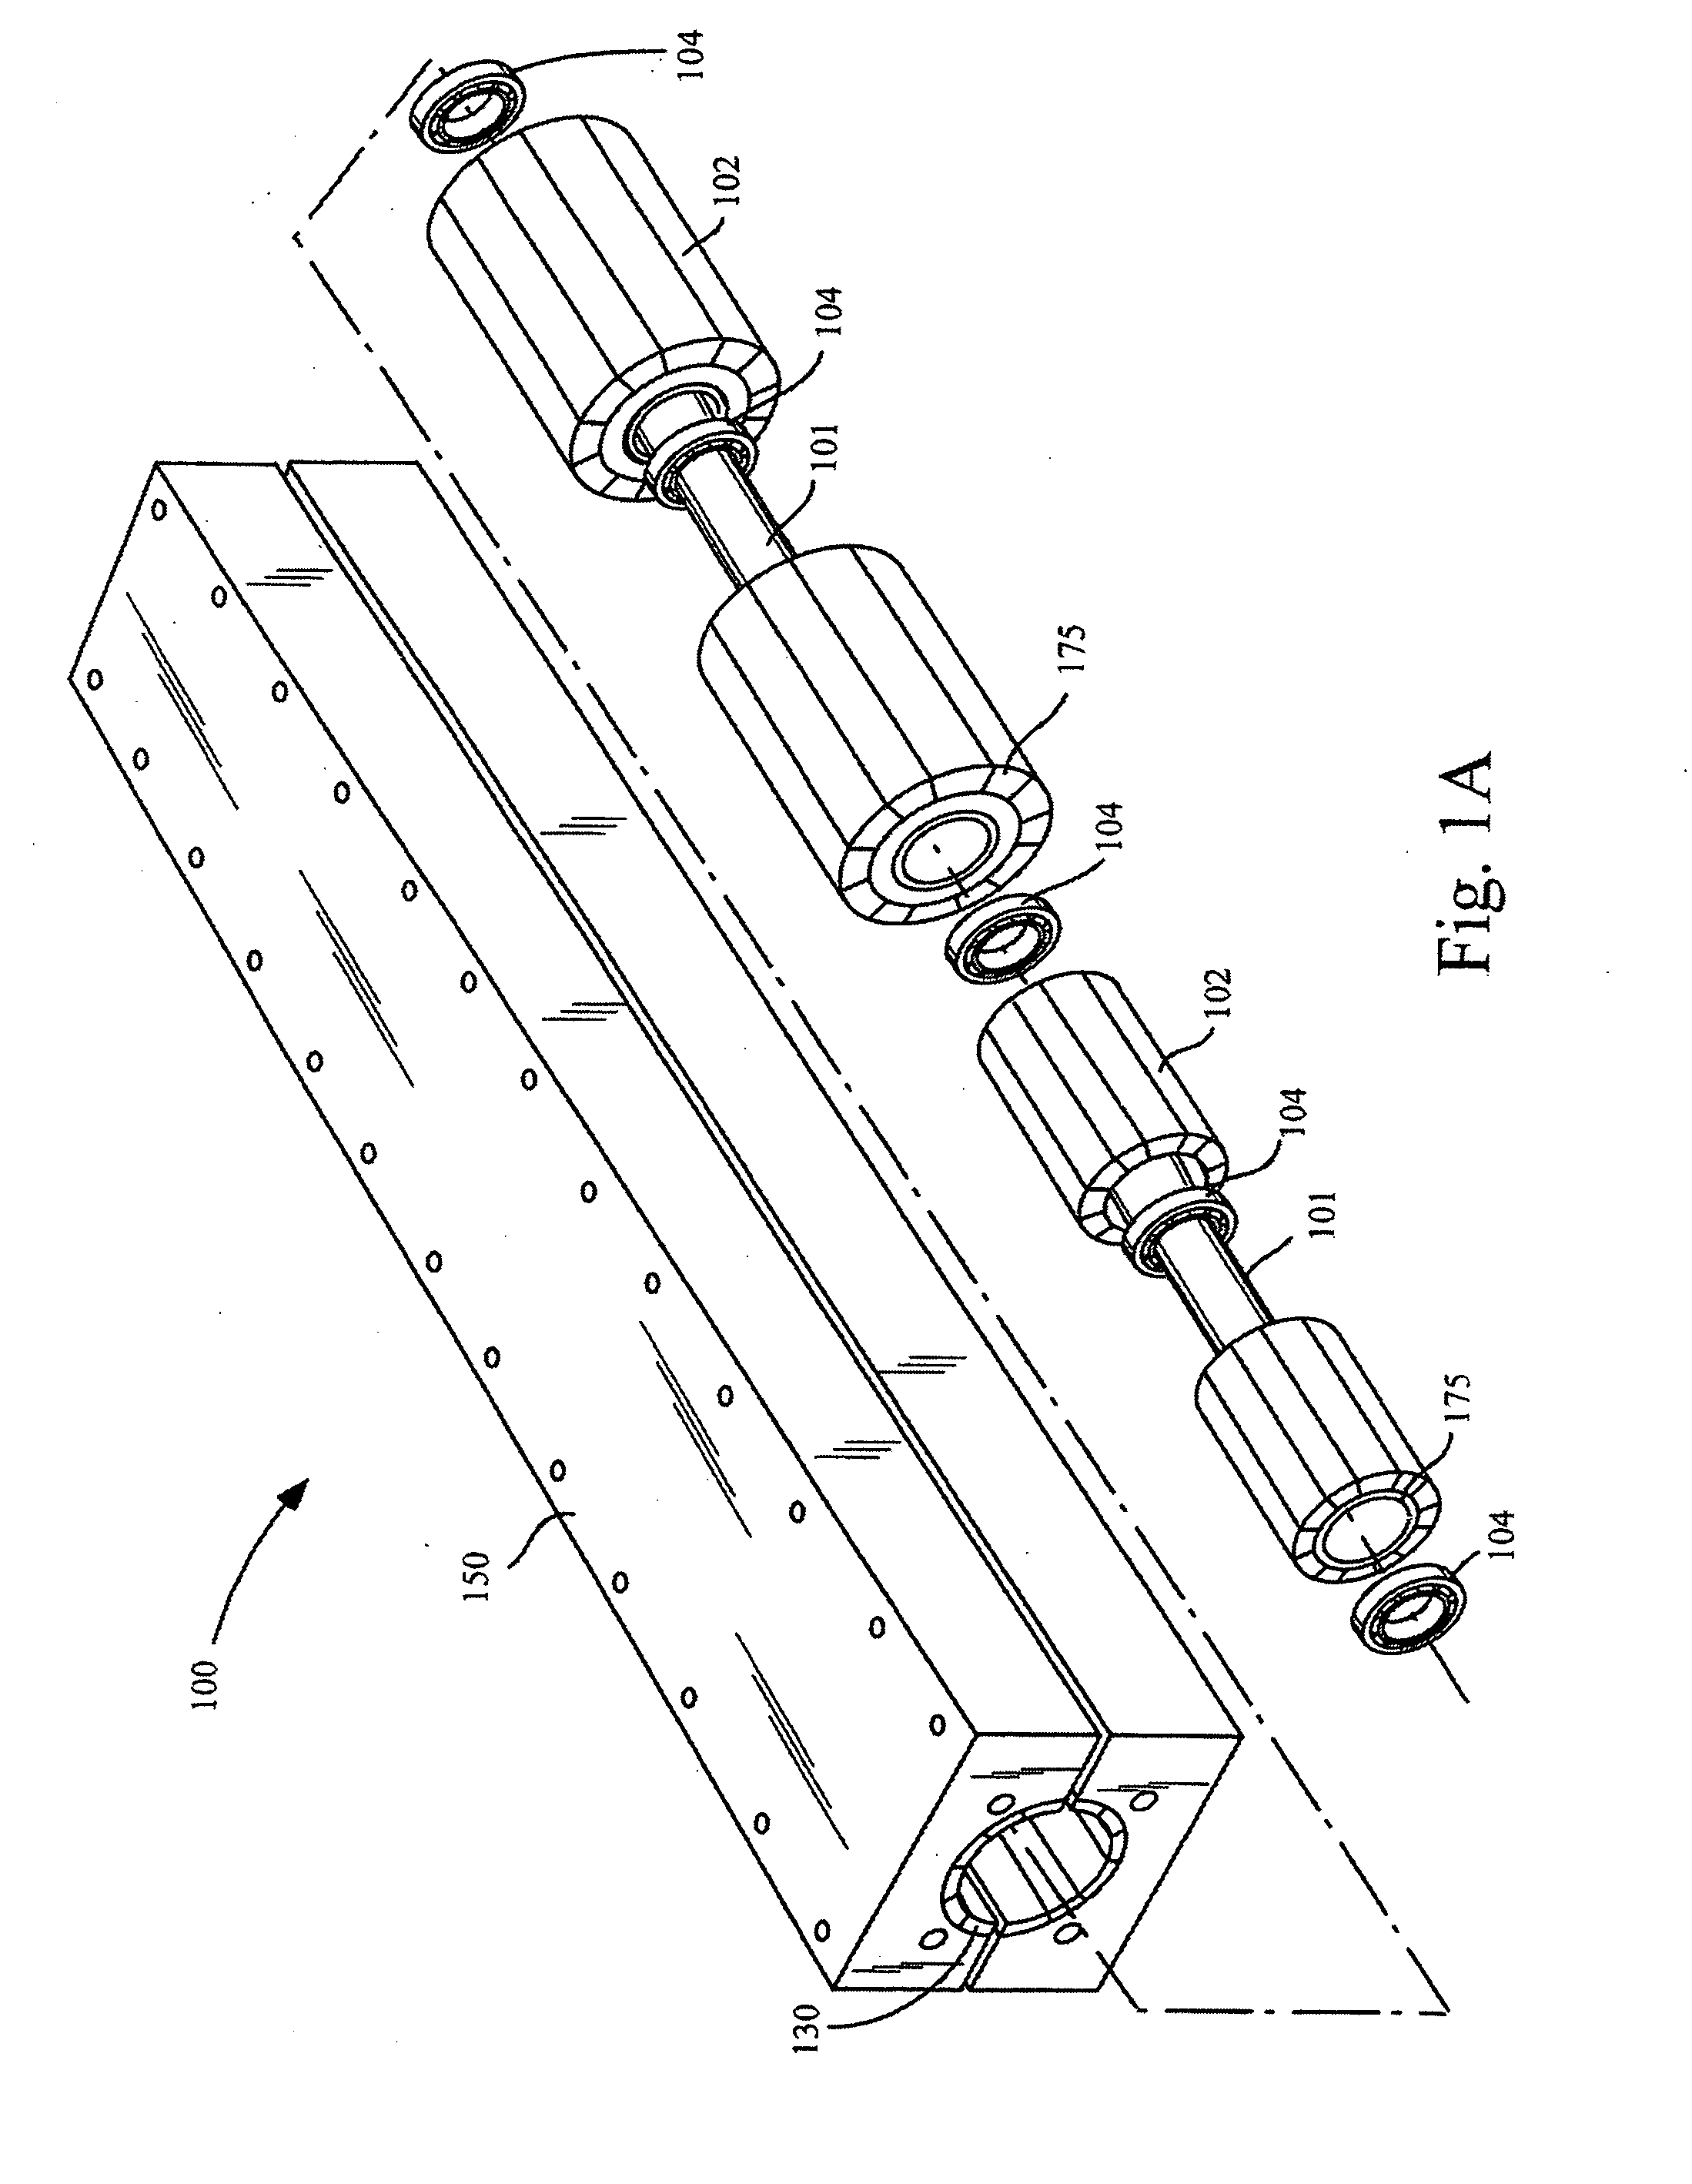 Motorized axle for use with environmentally friendly vehicles